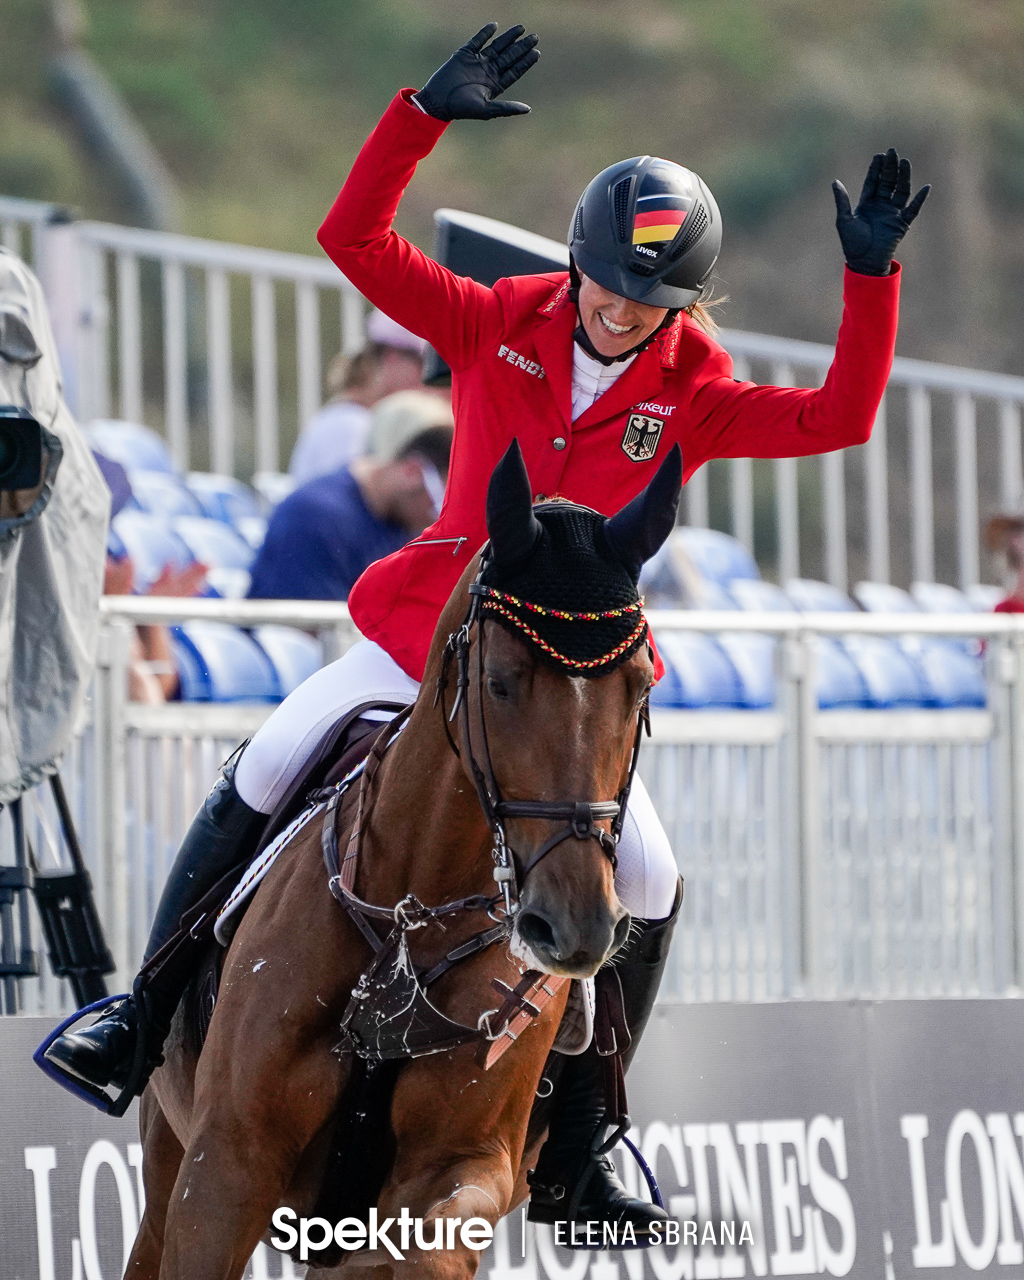 Earchphoto - Simone Blum of Germany celebrates a clear round at the 2018 World Equestrian Games in Tryon NC